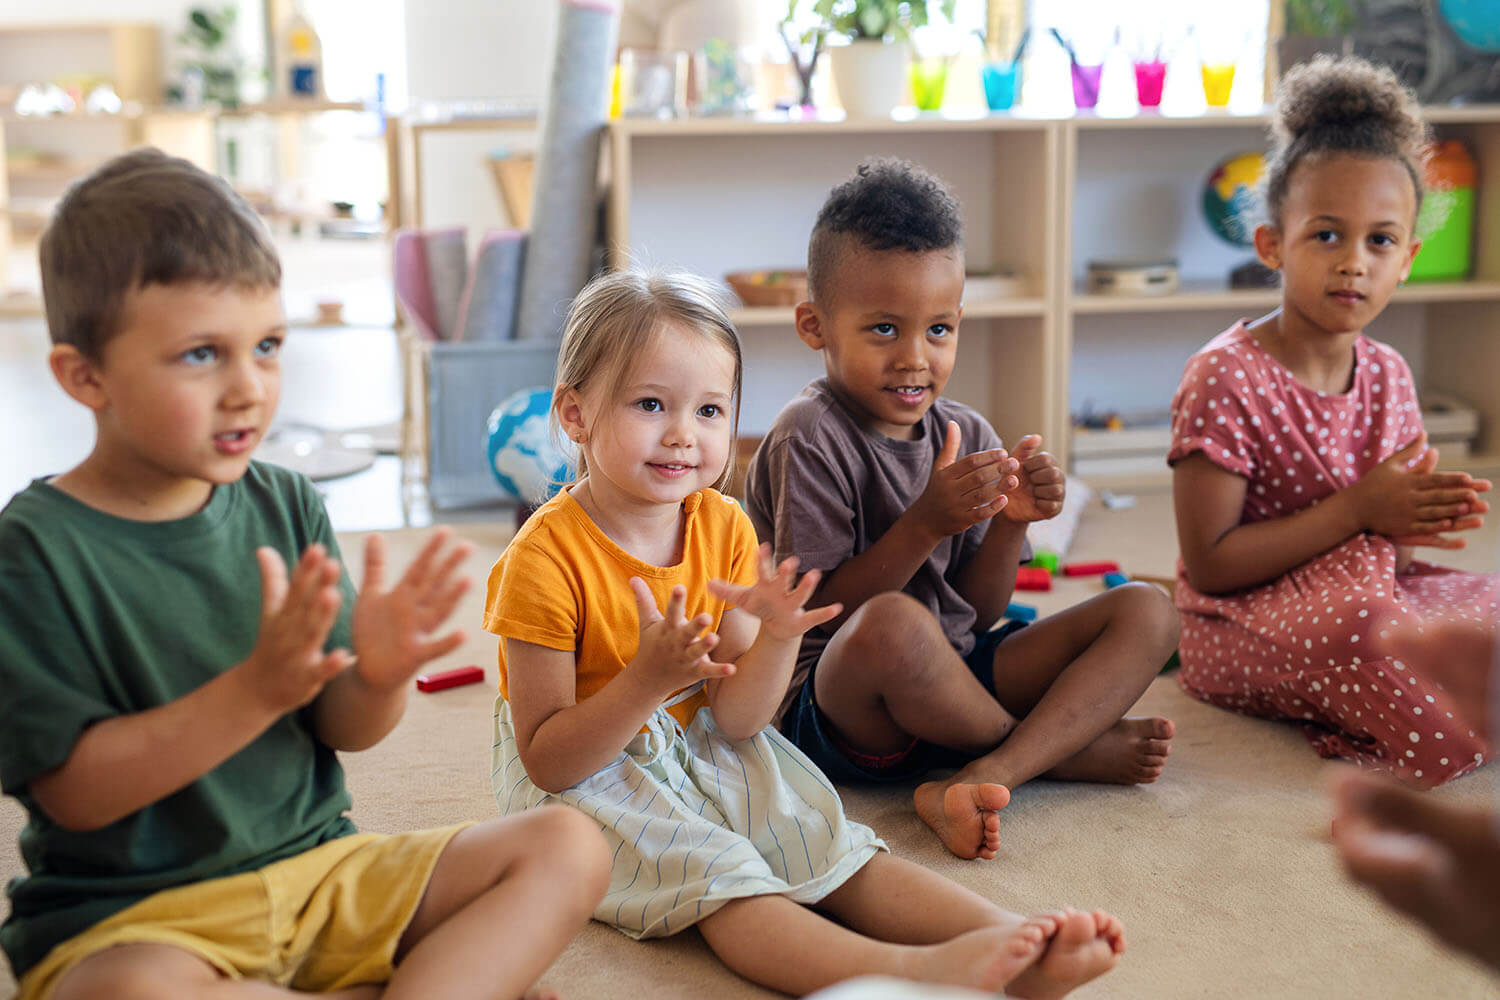 Diverse preschool children develop Kindergarten readiness and engage in Early Childhood Development through clapping hands during preschool education.